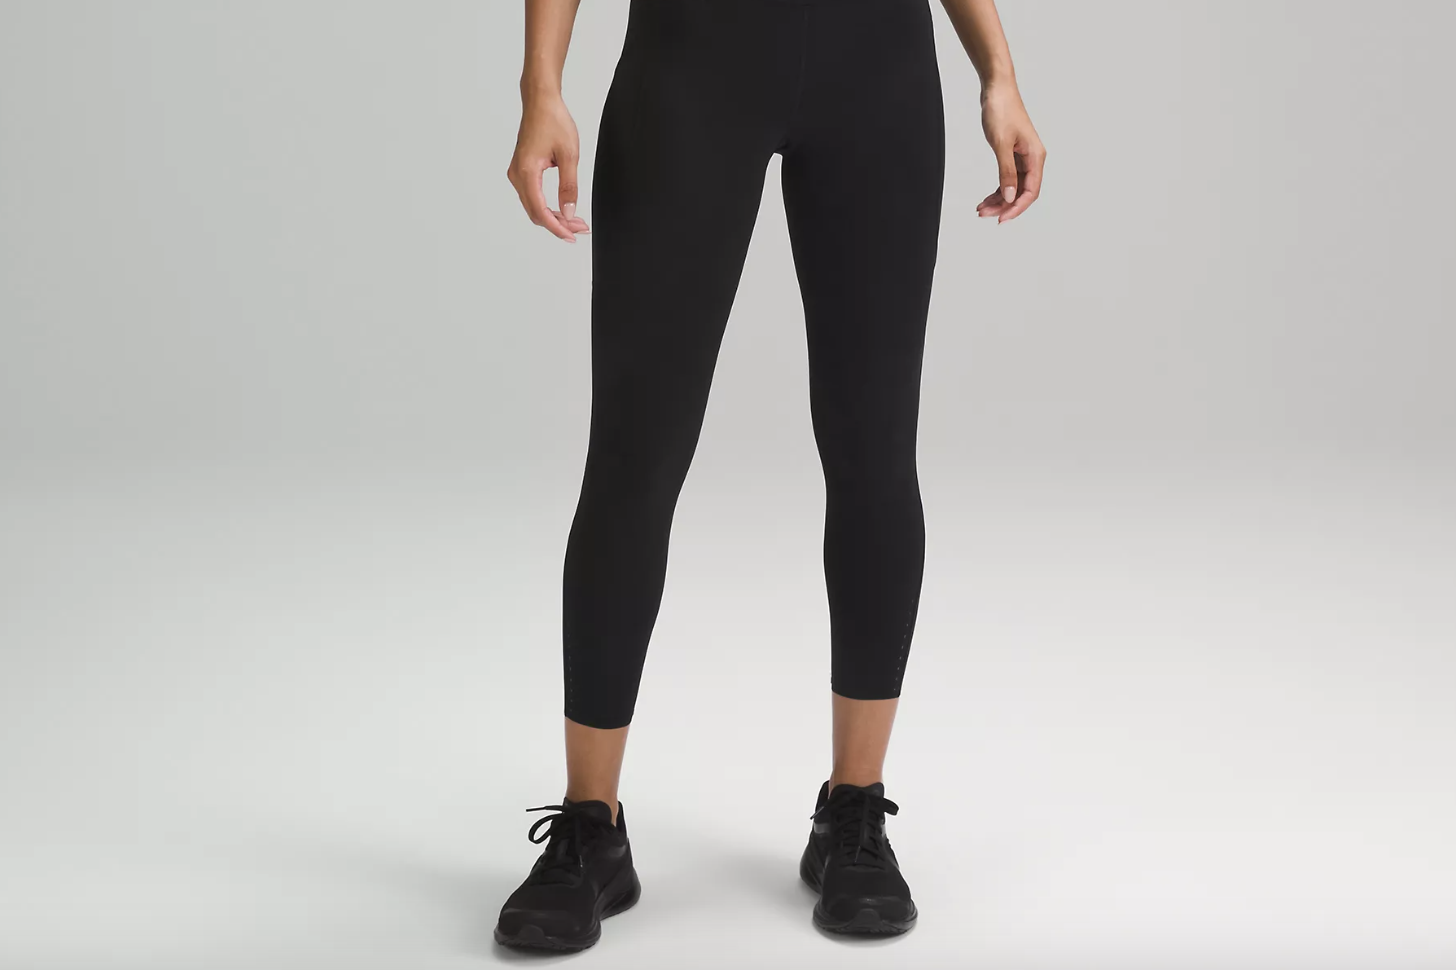 The Only Pair You Need: Best Leggings at lululemon